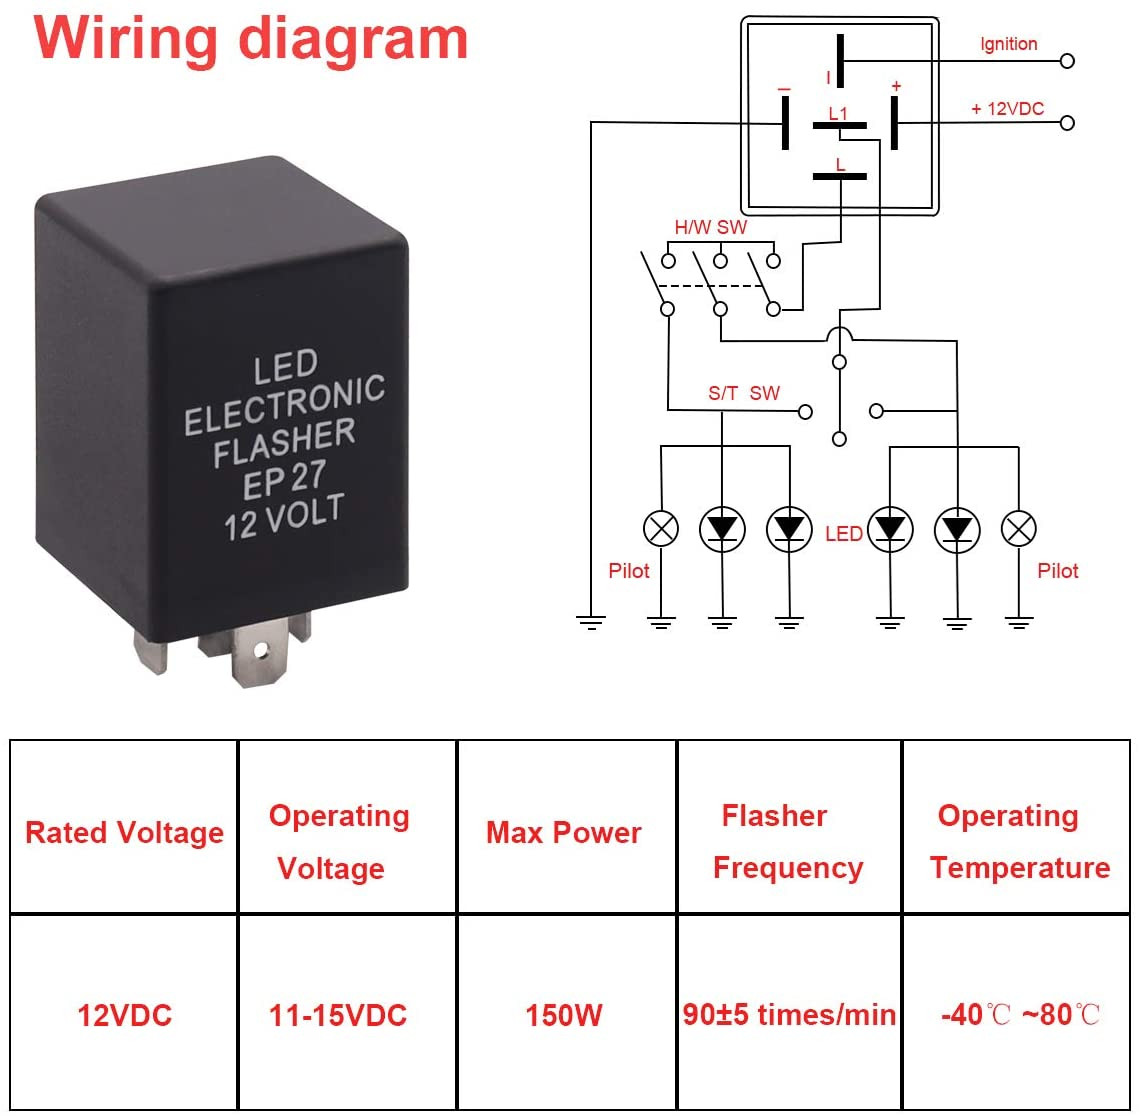 12 Volt Flasher Unit Wiring Diagram Buy Smseace Ep27 5p 12v Electronic Led Flasher Relays Used for ...